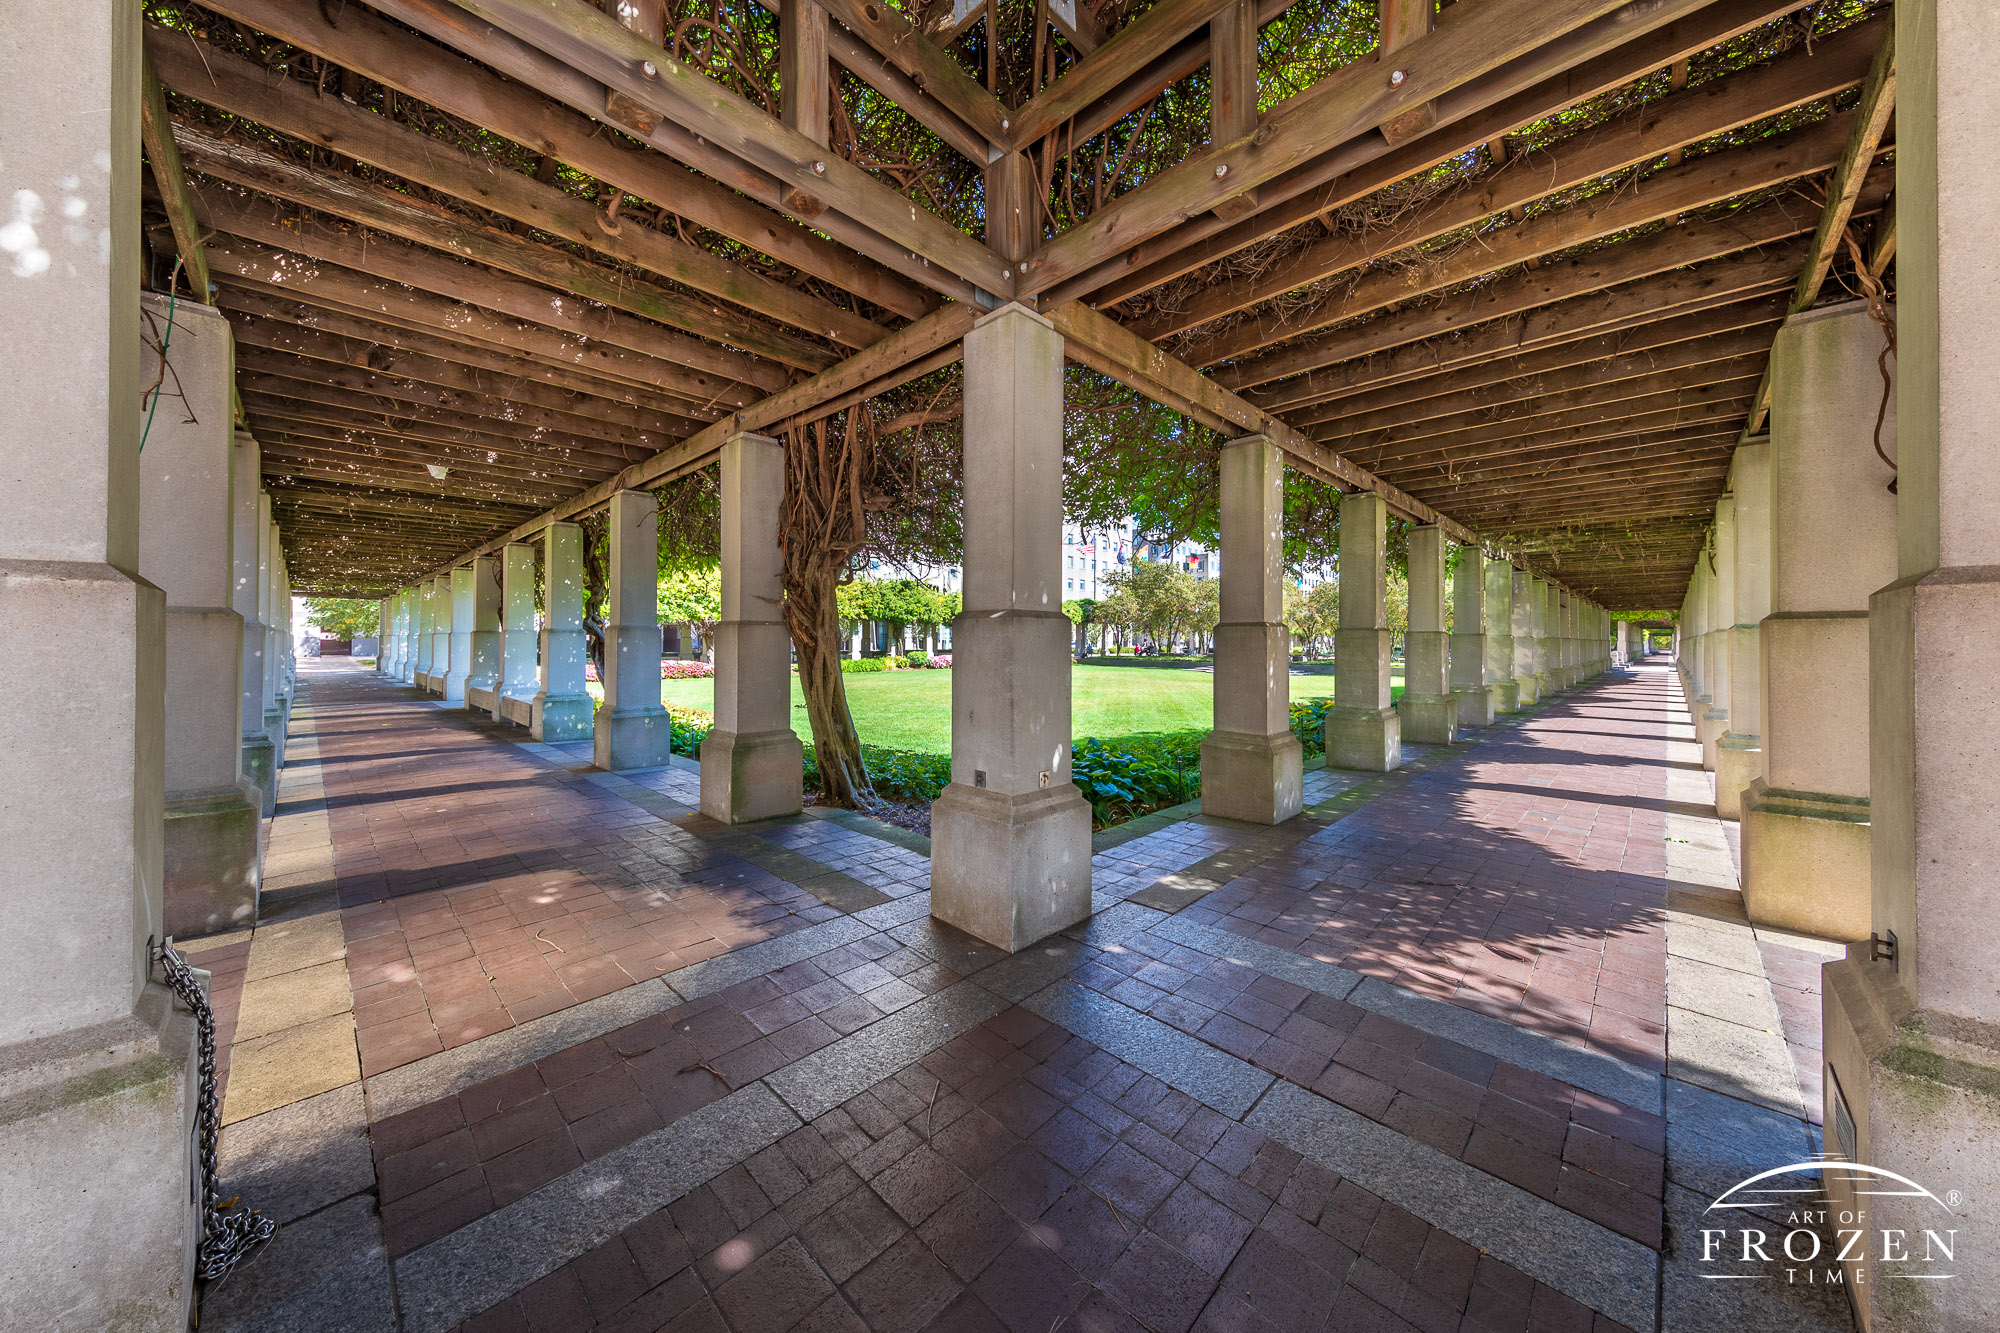 P&G Lawn Park in Cincinnati entails wisteria-covered pergolas which stretch for several hundred feet making for long shaded walkways outside Procter & Gamble Headquarters.